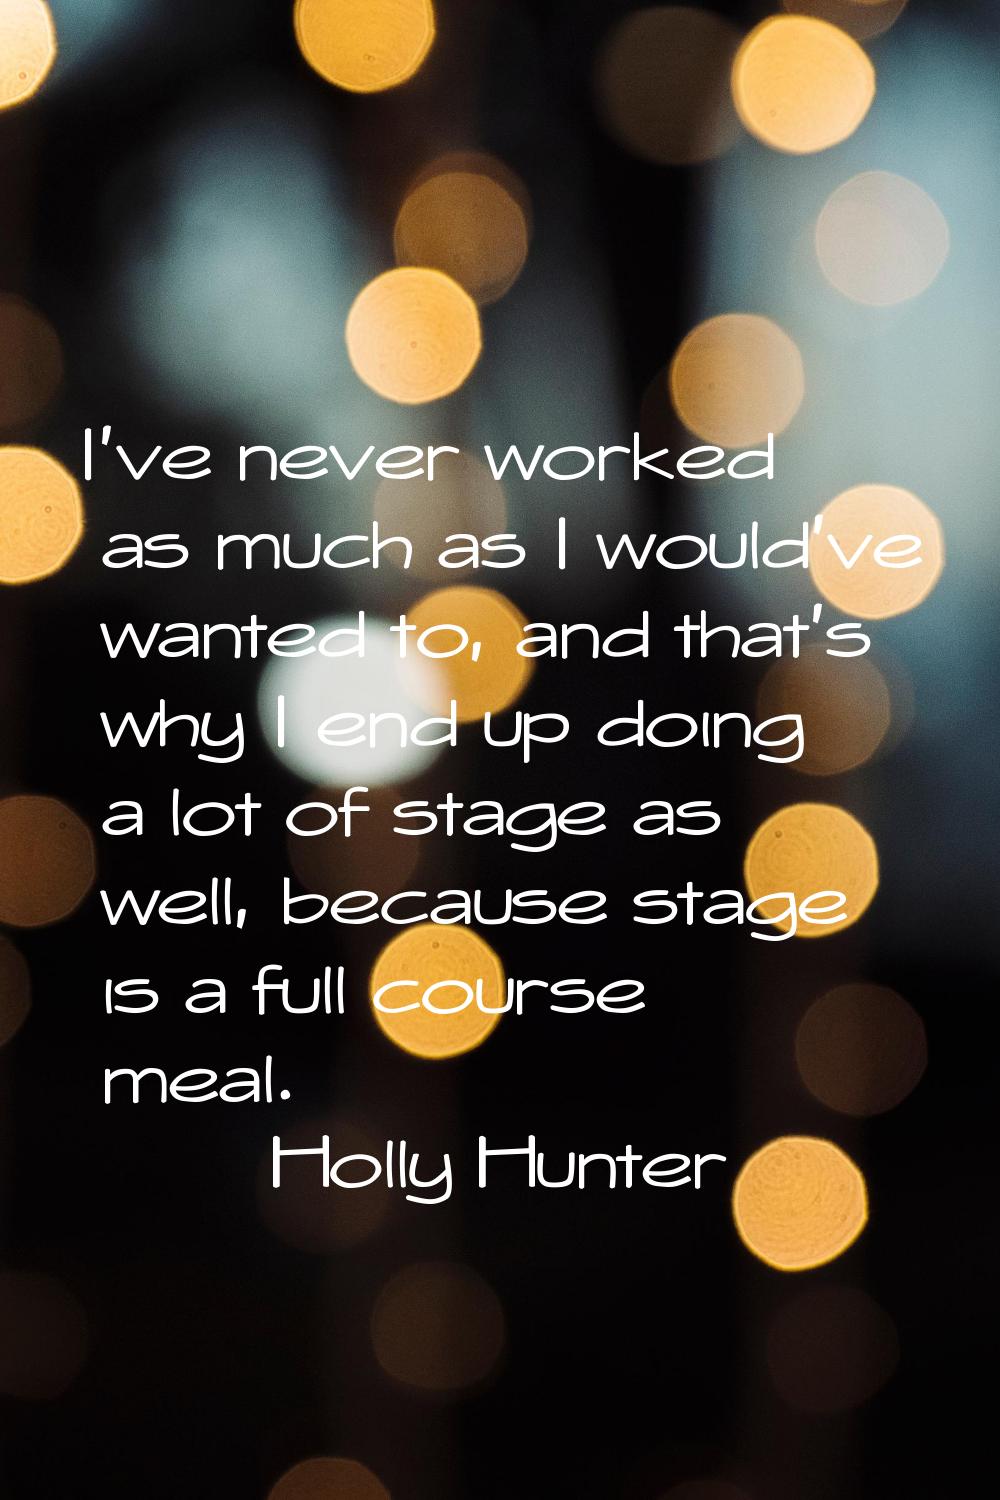 I've never worked as much as I would've wanted to, and that's why I end up doing a lot of stage as 